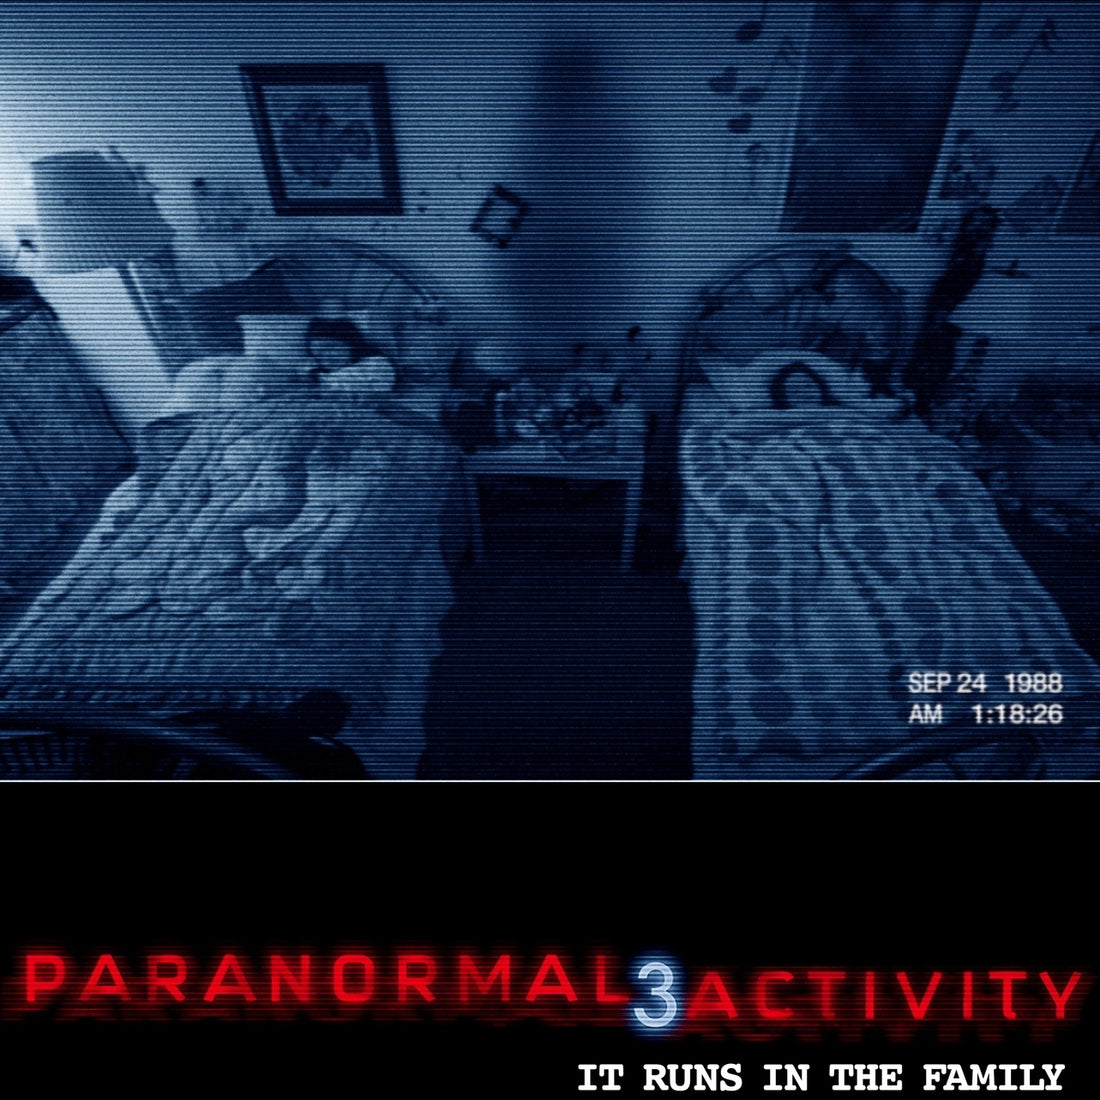 Episode 279: Paranormal Activity 3